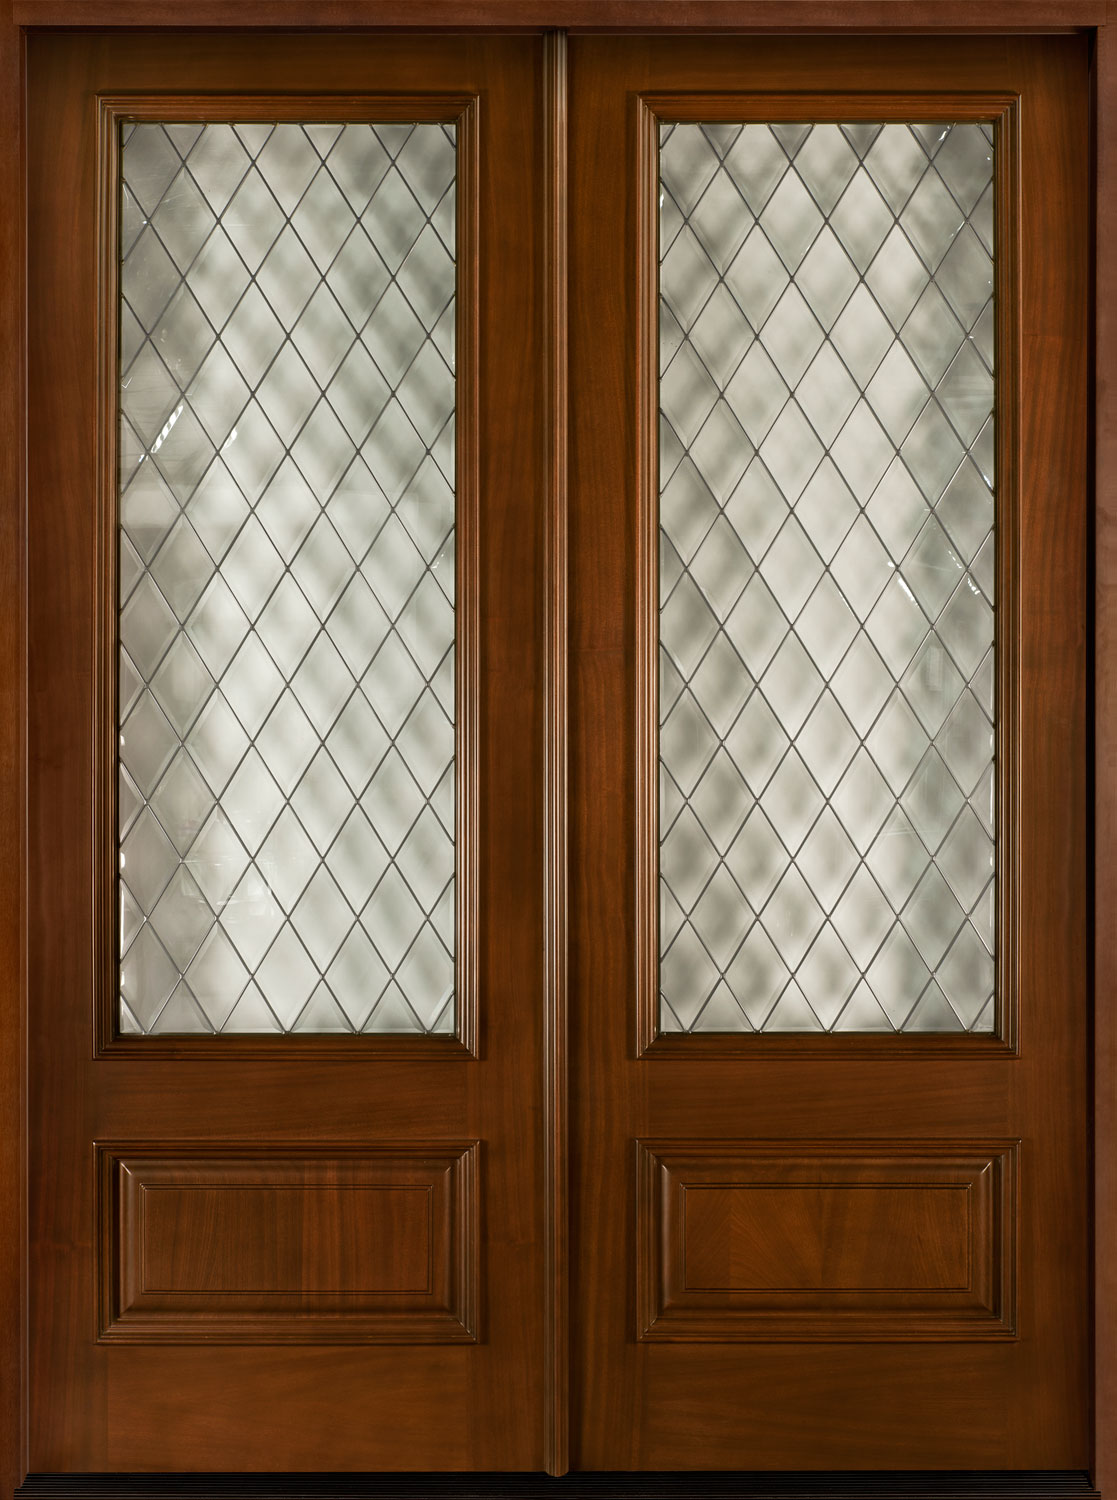 Simulated Leaded Glass on Wood Double Door